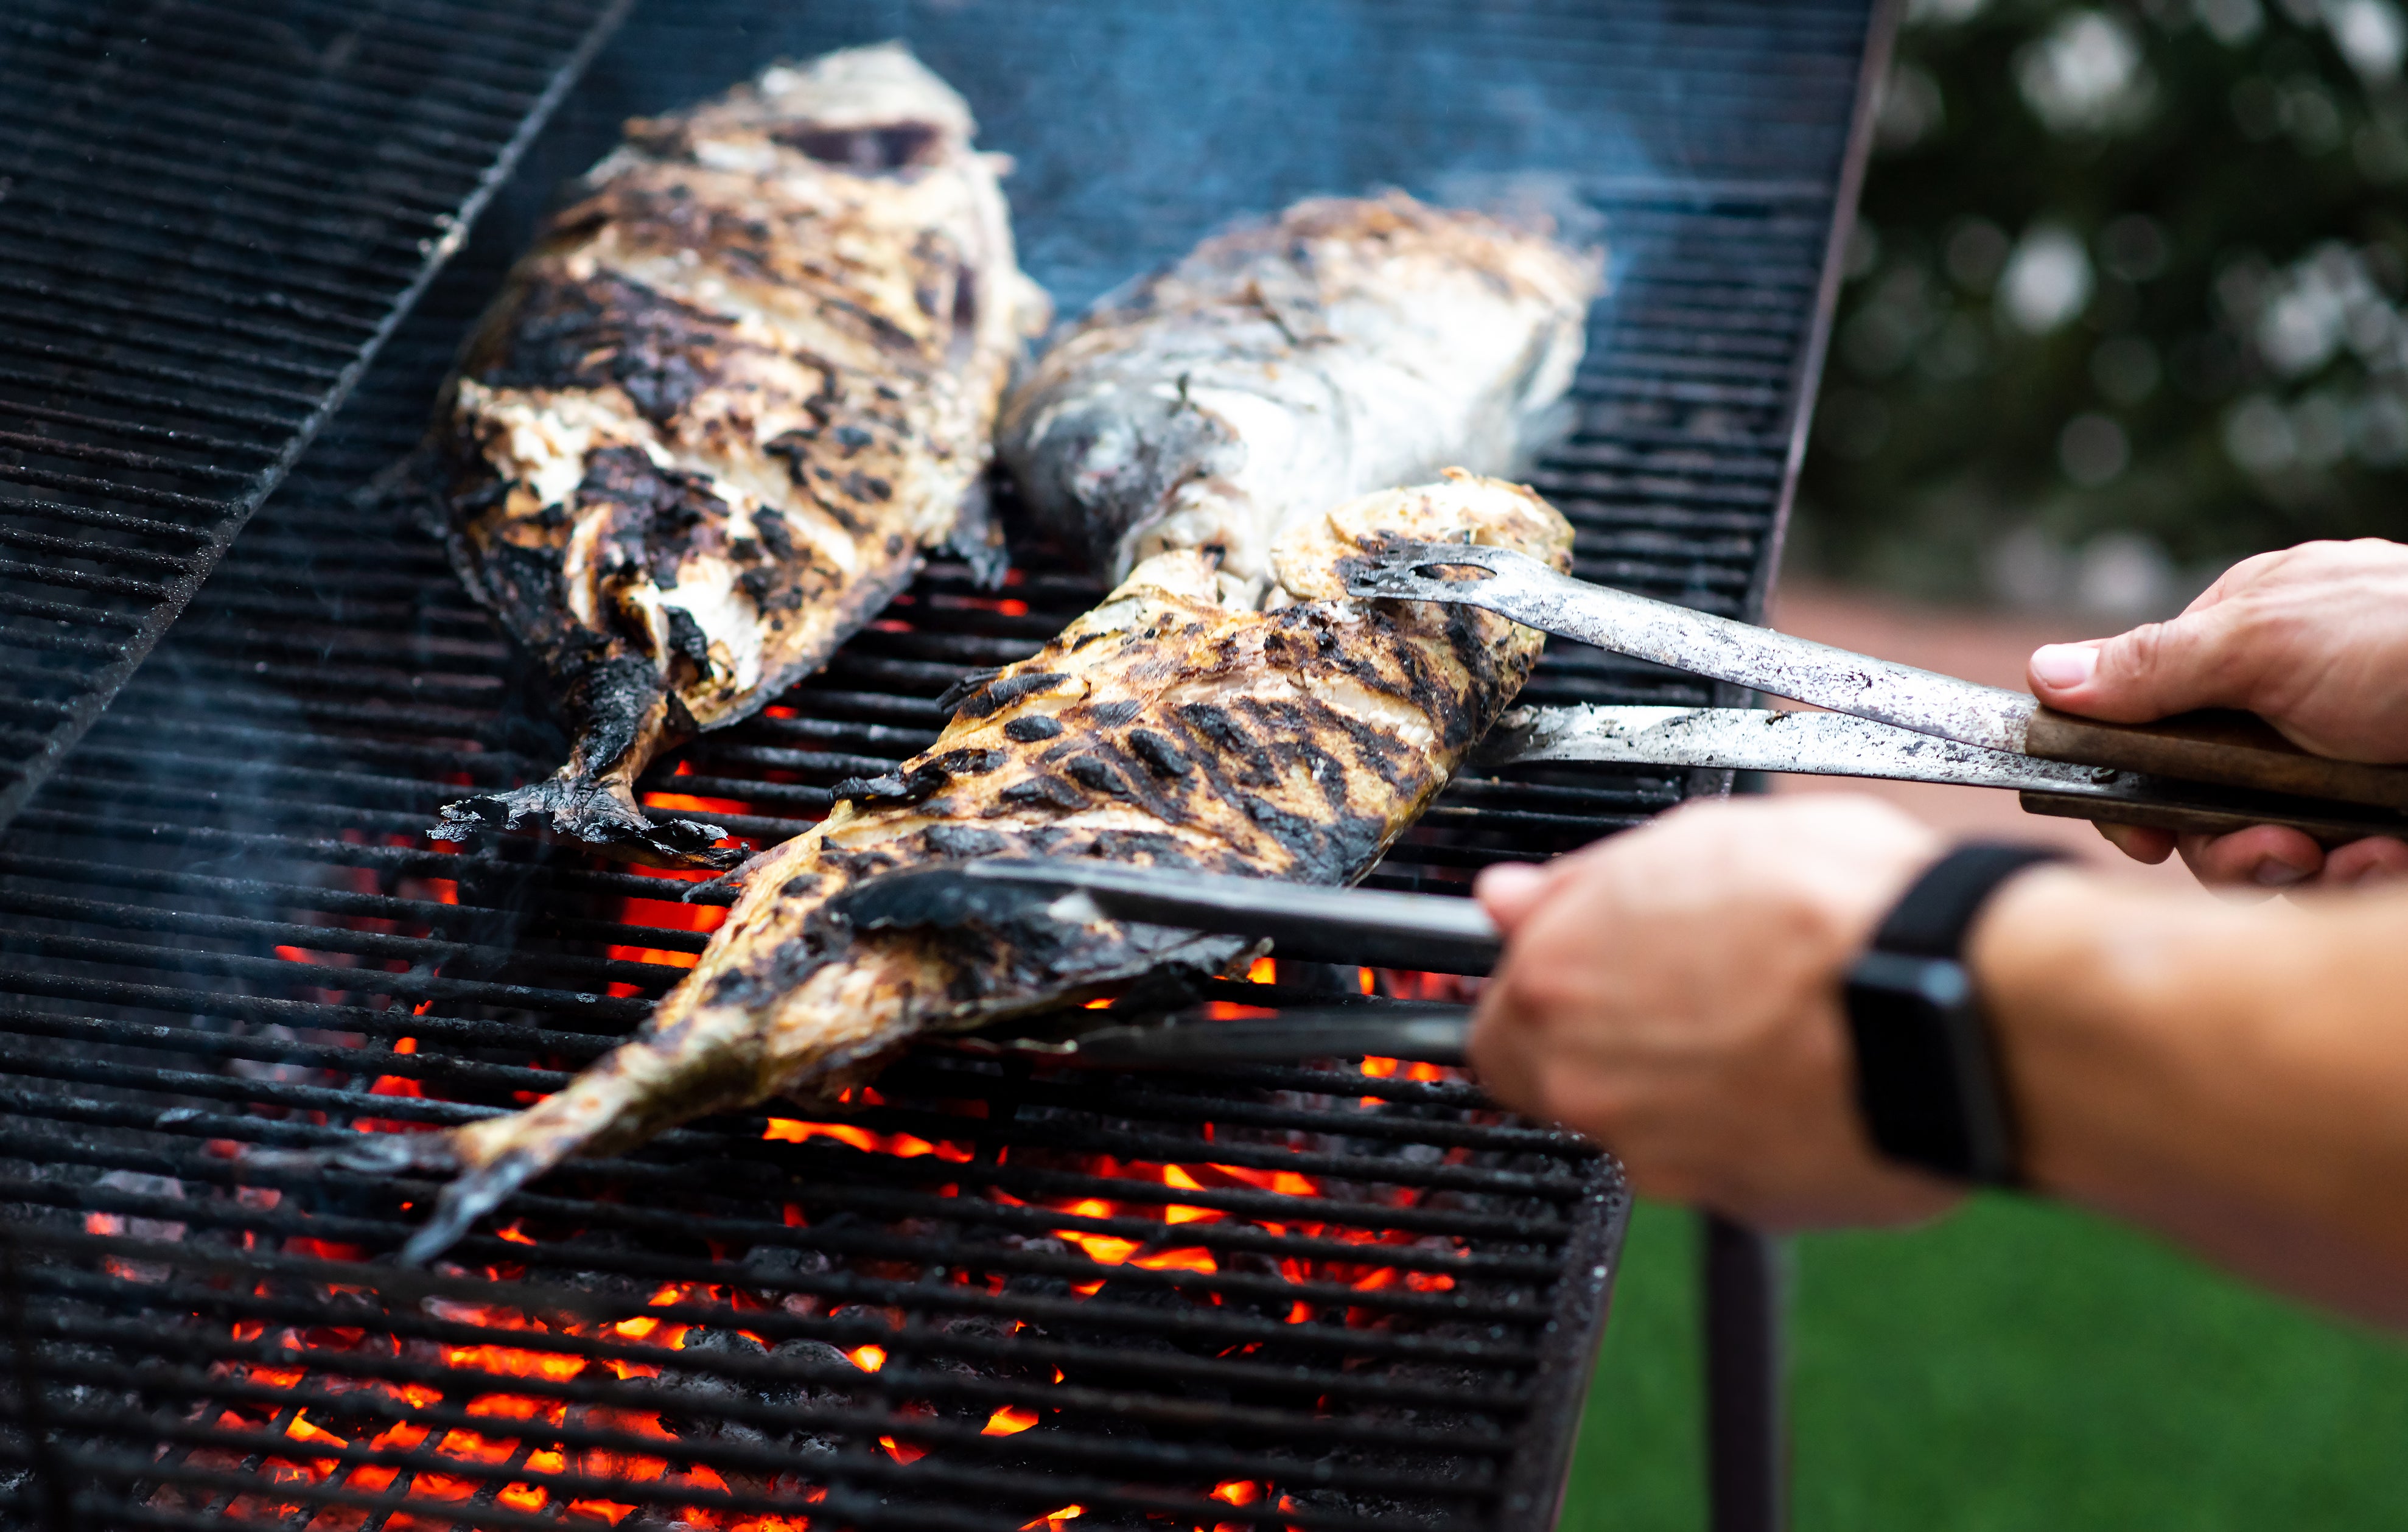 ‘The way to get people to grill more and more is to ensure that their first experience is fantastic’